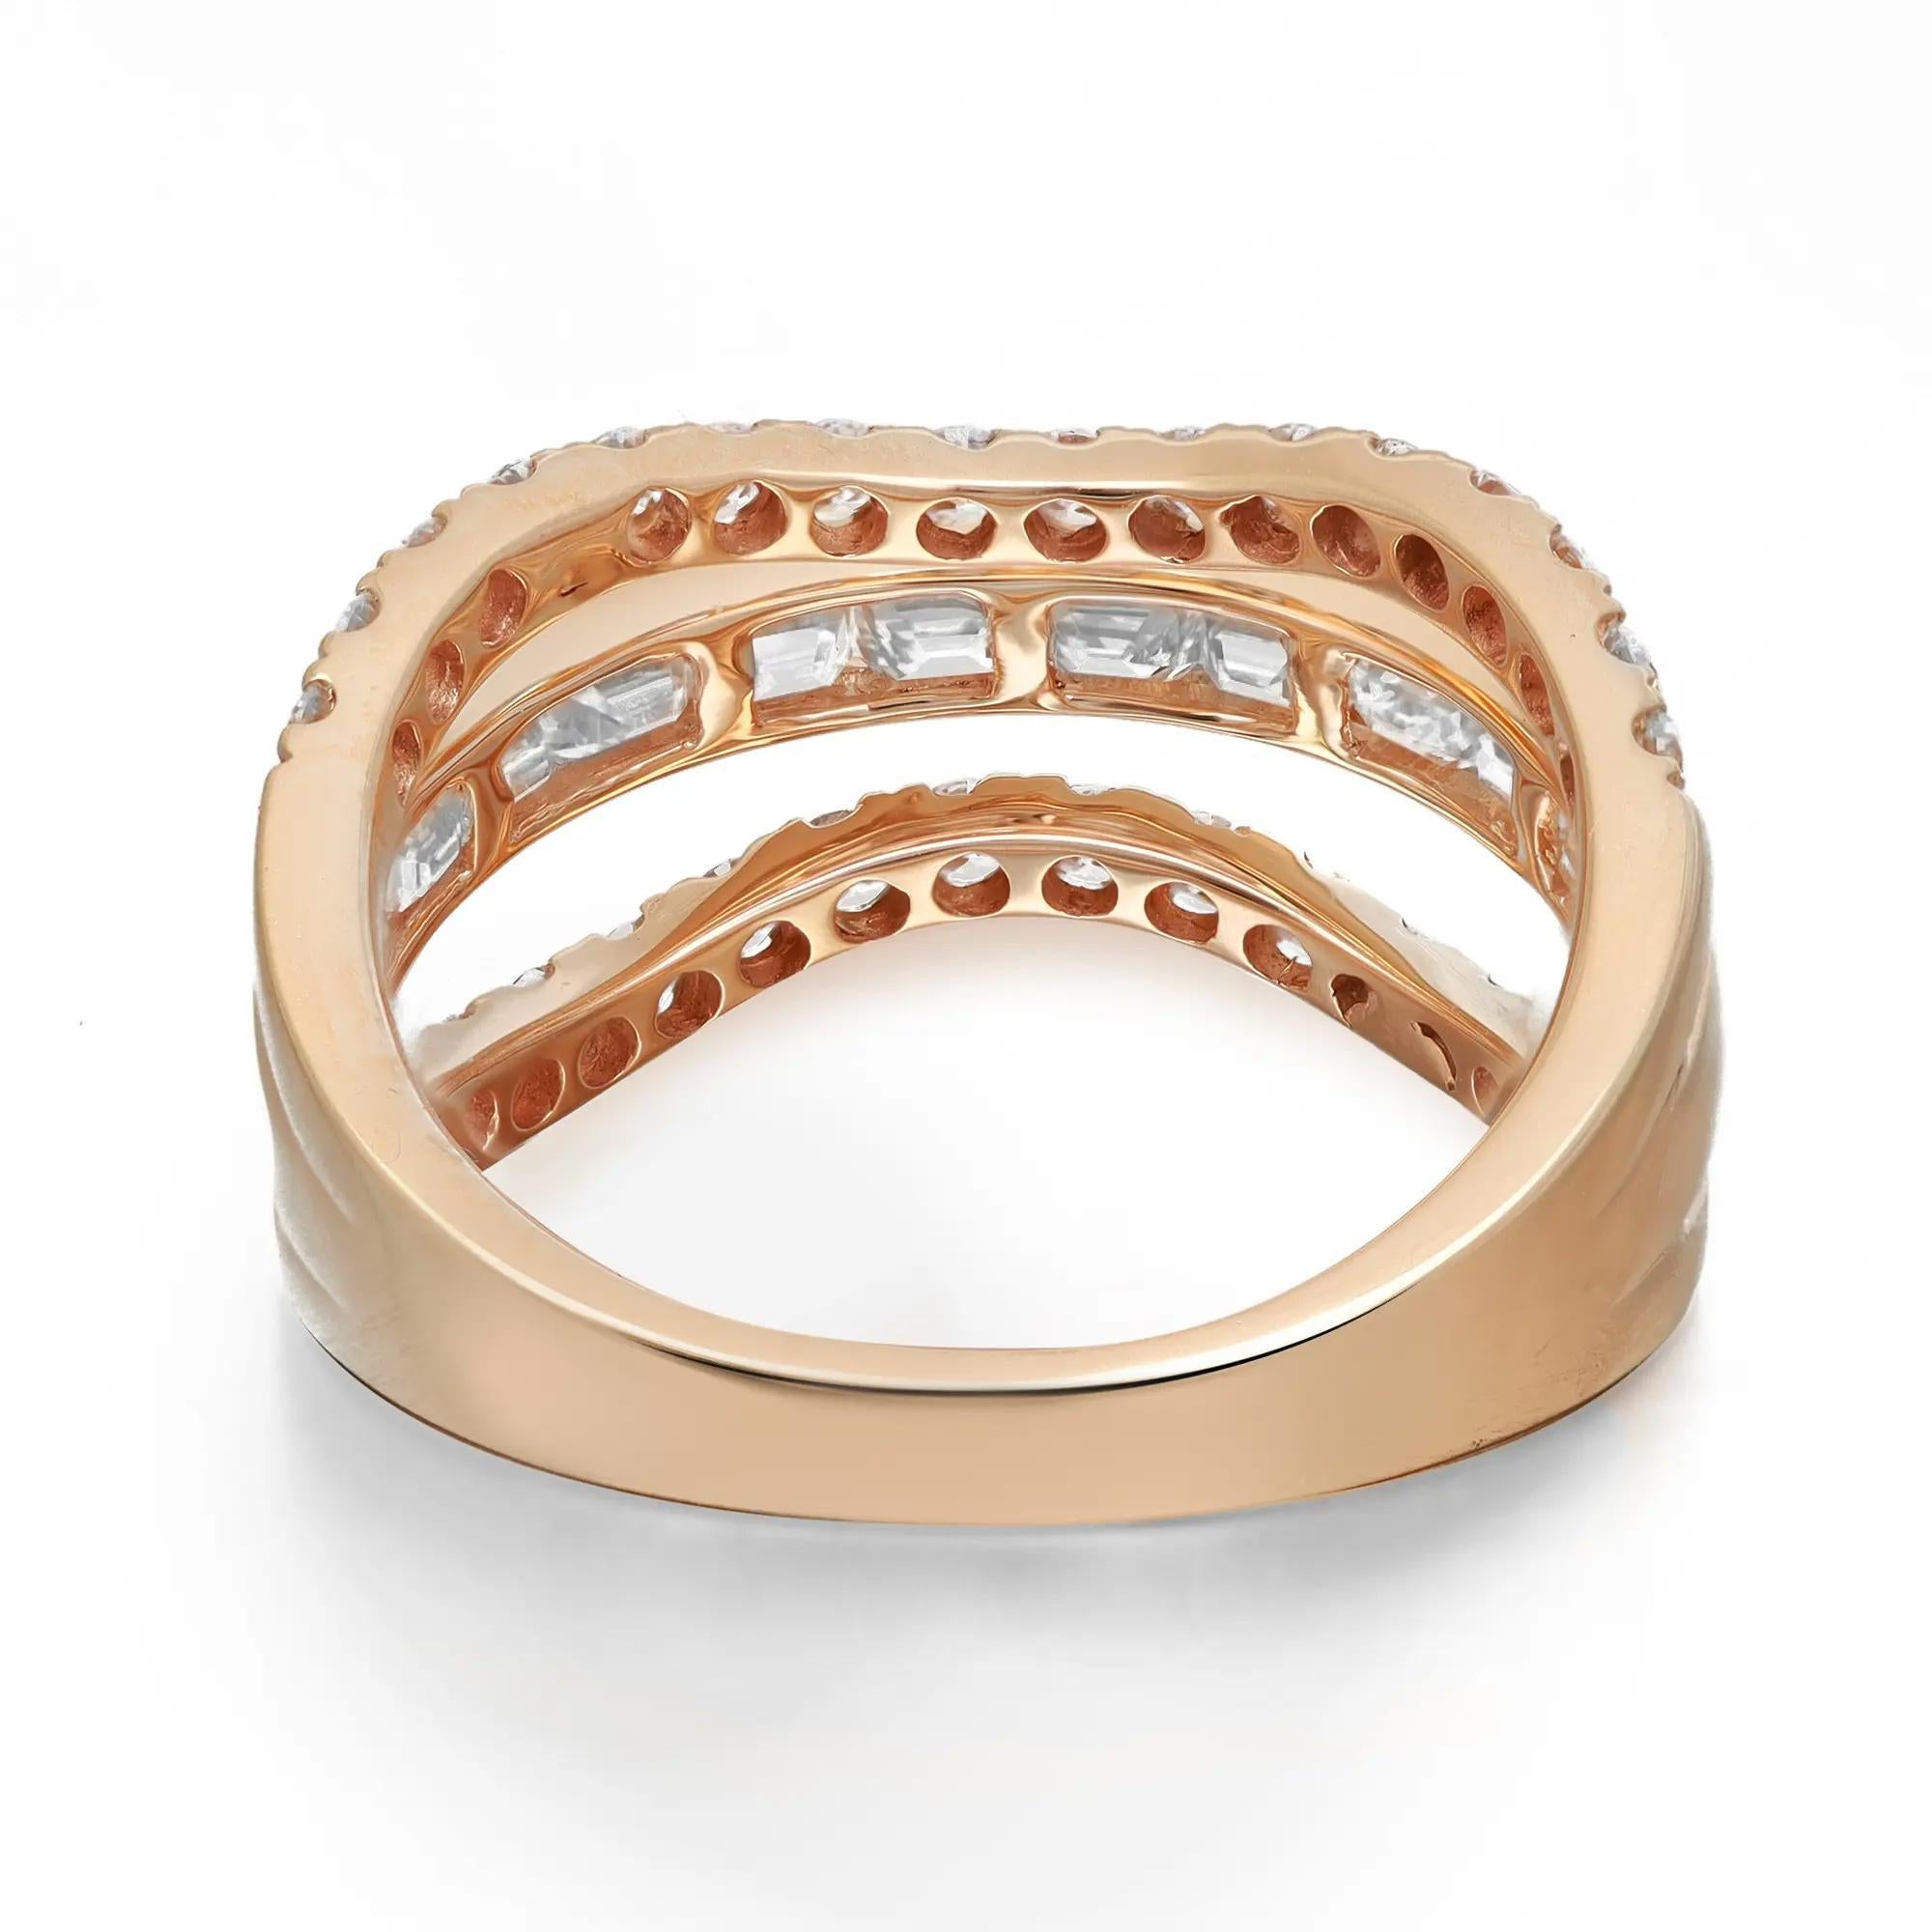 Shimmering and elegant, this diamond band ring is perfect for any occasion. Crafted in lustrous 18K rose gold. This beautiful ring is adorned with channel set emerald cut diamonds in the center with two curved rows of round brilliant cut diamonds.